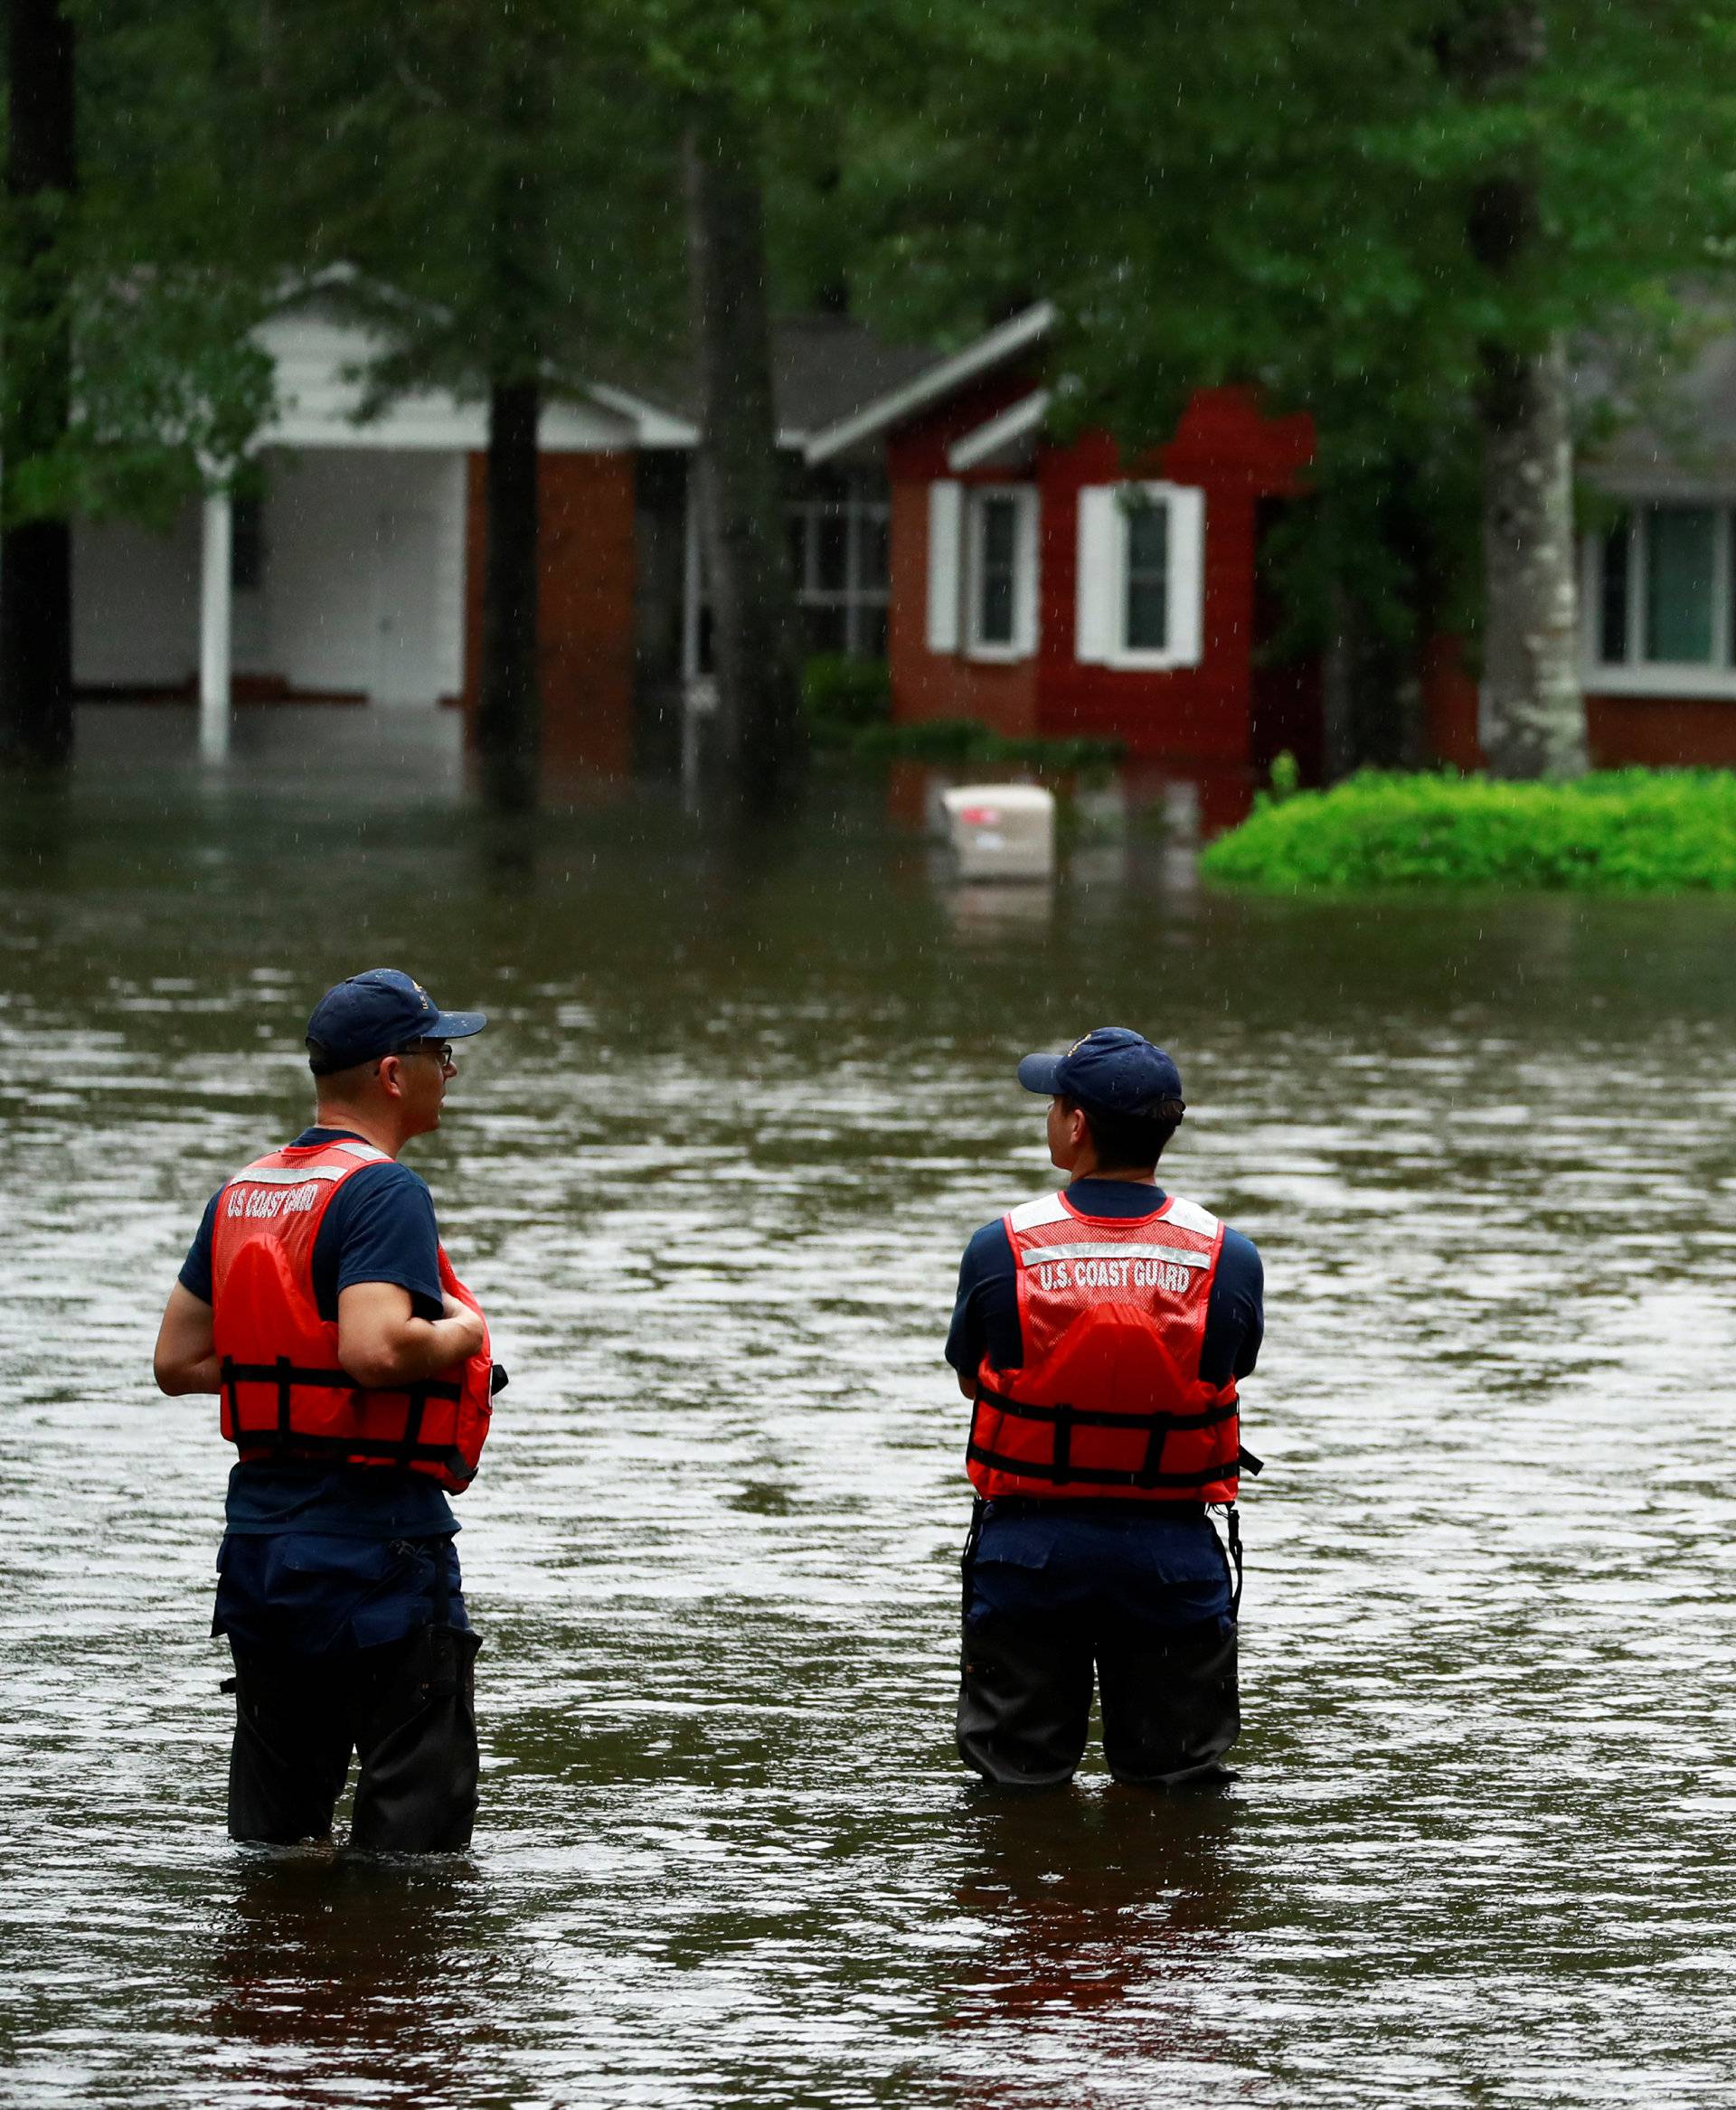 Coast Guard members inspect the flood waters caused by Hurricane Florence in Lumberton.